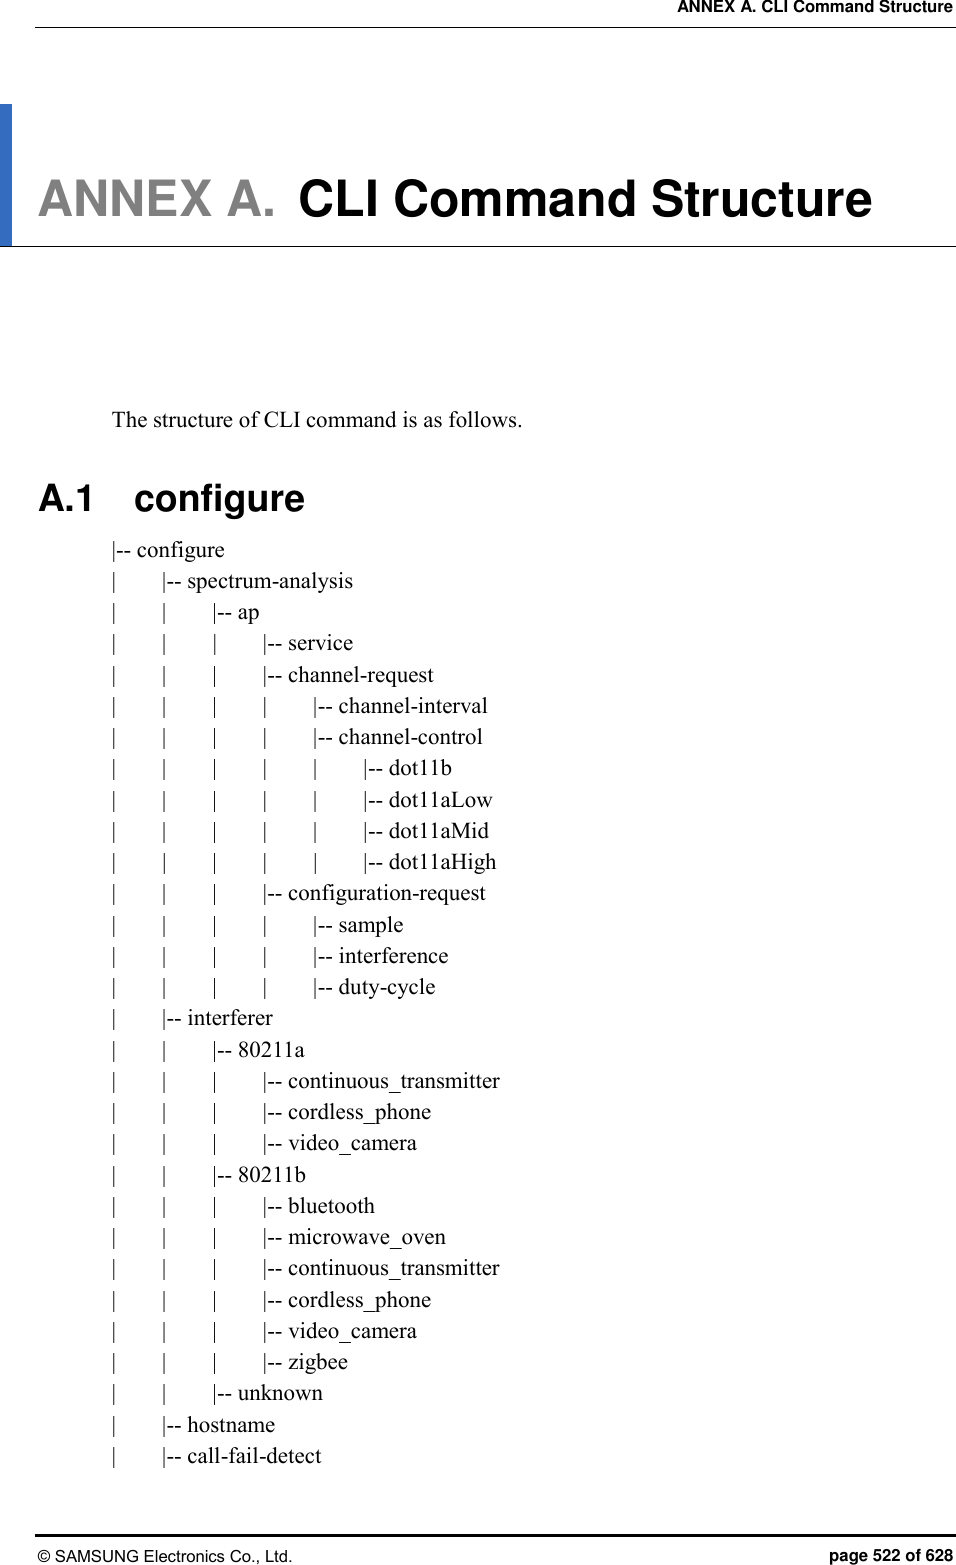 ANNEX A. CLI Command Structure © SAMSUNG Electronics Co., Ltd.  page 522 of 628 ANNEX A.  CLI Command Structure      The structure of CLI command is as follows.  A.1  configure |-- configure |        |-- spectrum-analysis |        |        |-- ap |        |    |        |-- service |        |        |        |-- channel-request |        |        |        |        |-- channel-interval |        |        |        |        |-- channel-control |        |        |        |        |        |-- dot11b |        |        |        |        |        |-- dot11aLow |        |        |        |        |        |-- dot11aMid |        |        |        |        |        |-- dot11aHigh |        |        |        |-- configuration-request |        |        |        |        |-- sample |        |        |        |        |-- interference |        |        |        |        |-- duty-cycle |        |-- interferer |        |        |-- 80211a |        |        |        |-- continuous_transmitter |        |        |        |-- cordless_phone |        |        |        |-- video_camera |        |        |-- 80211b |        |        |        |-- bluetooth |        |        |        |-- microwave_oven |        |        |        |-- continuous_transmitter |        |        |        |-- cordless_phone |        |        |        |-- video_camera |        |        |        |-- zigbee |        |        |-- unknown |        |-- hostname |        |-- call-fail-detect 